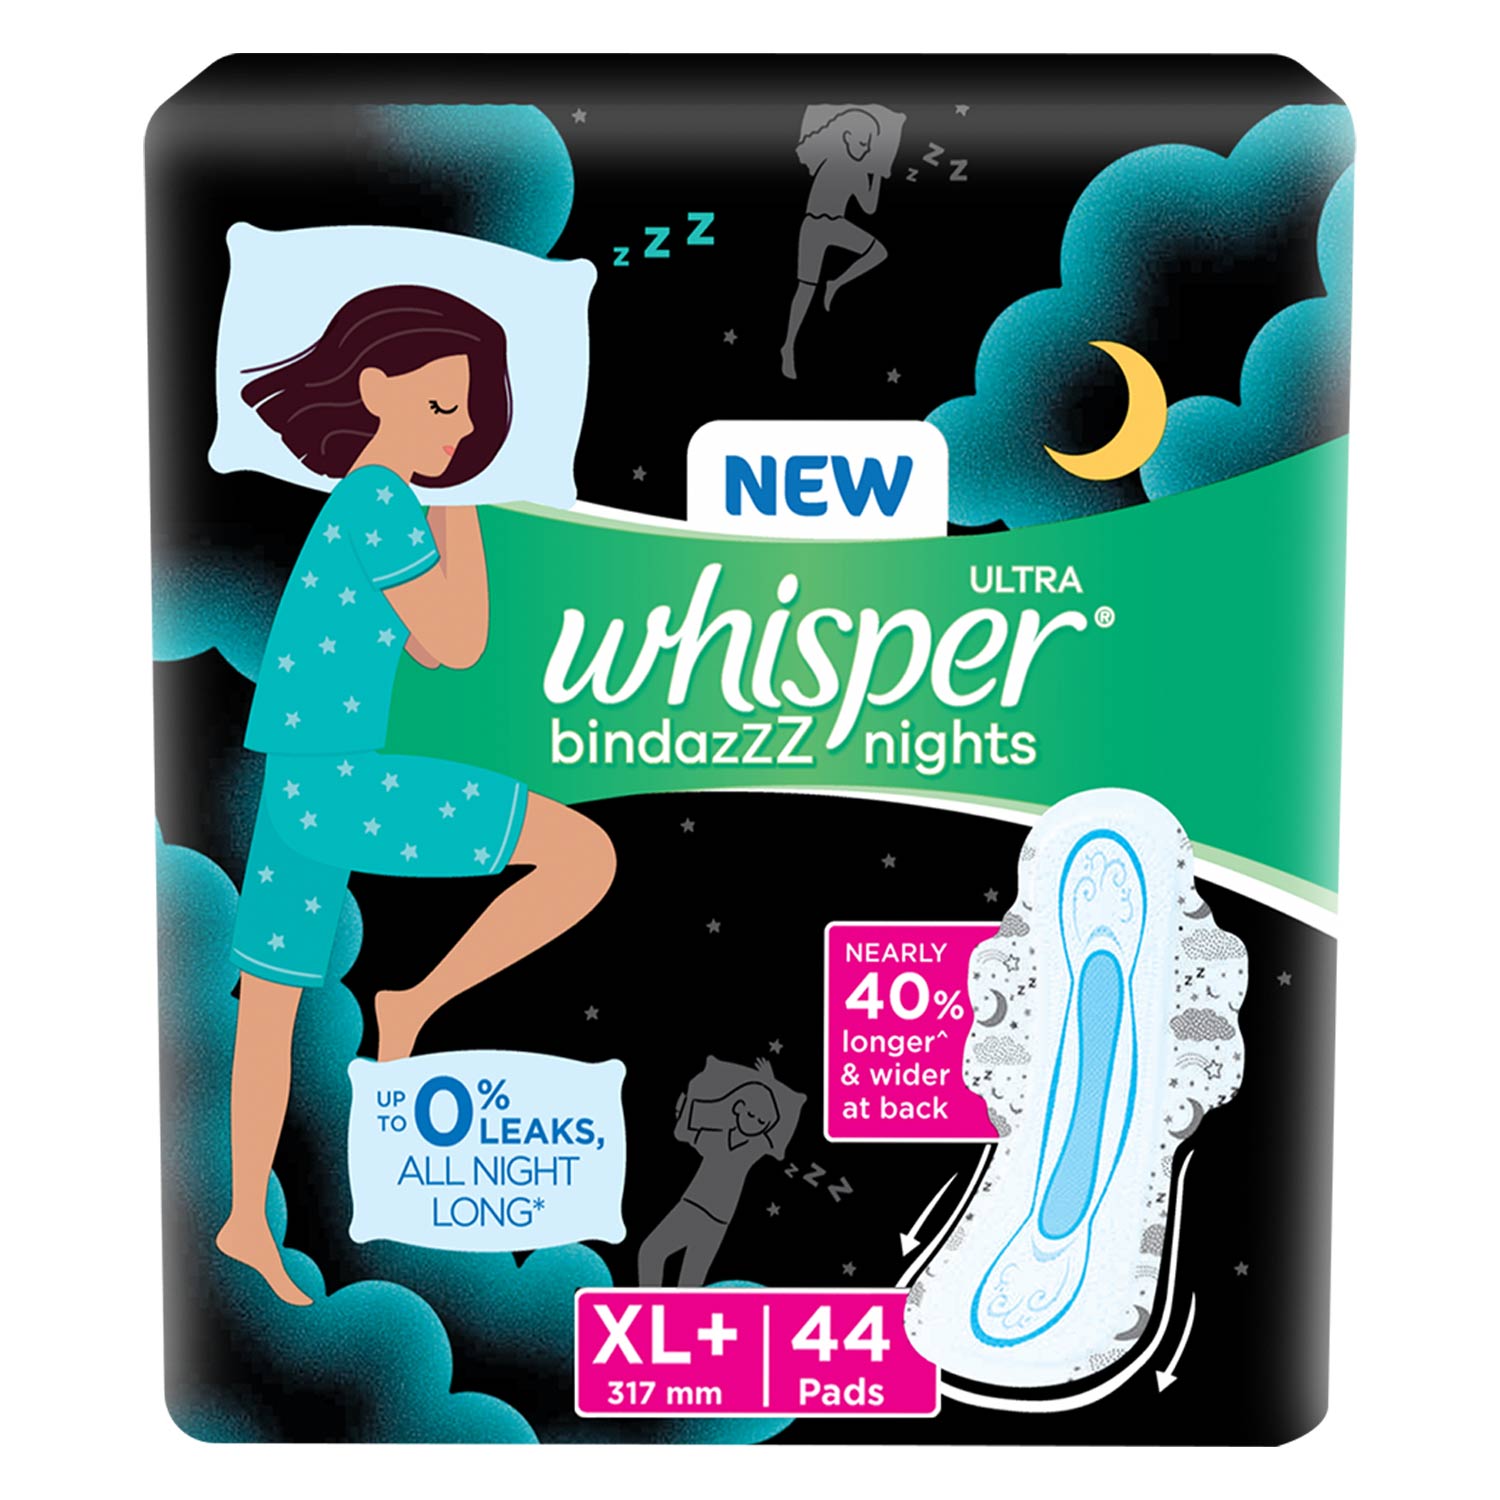 Whisper Bindazzz Night Sanitary Pads|Pack of 44 thin Pads|XL+|upto 0% Leaks|40% Longer & Wider back|Dry top sheet|Long lasting coverage|Faster absorption|31.7 cm Long|With disposable wrap